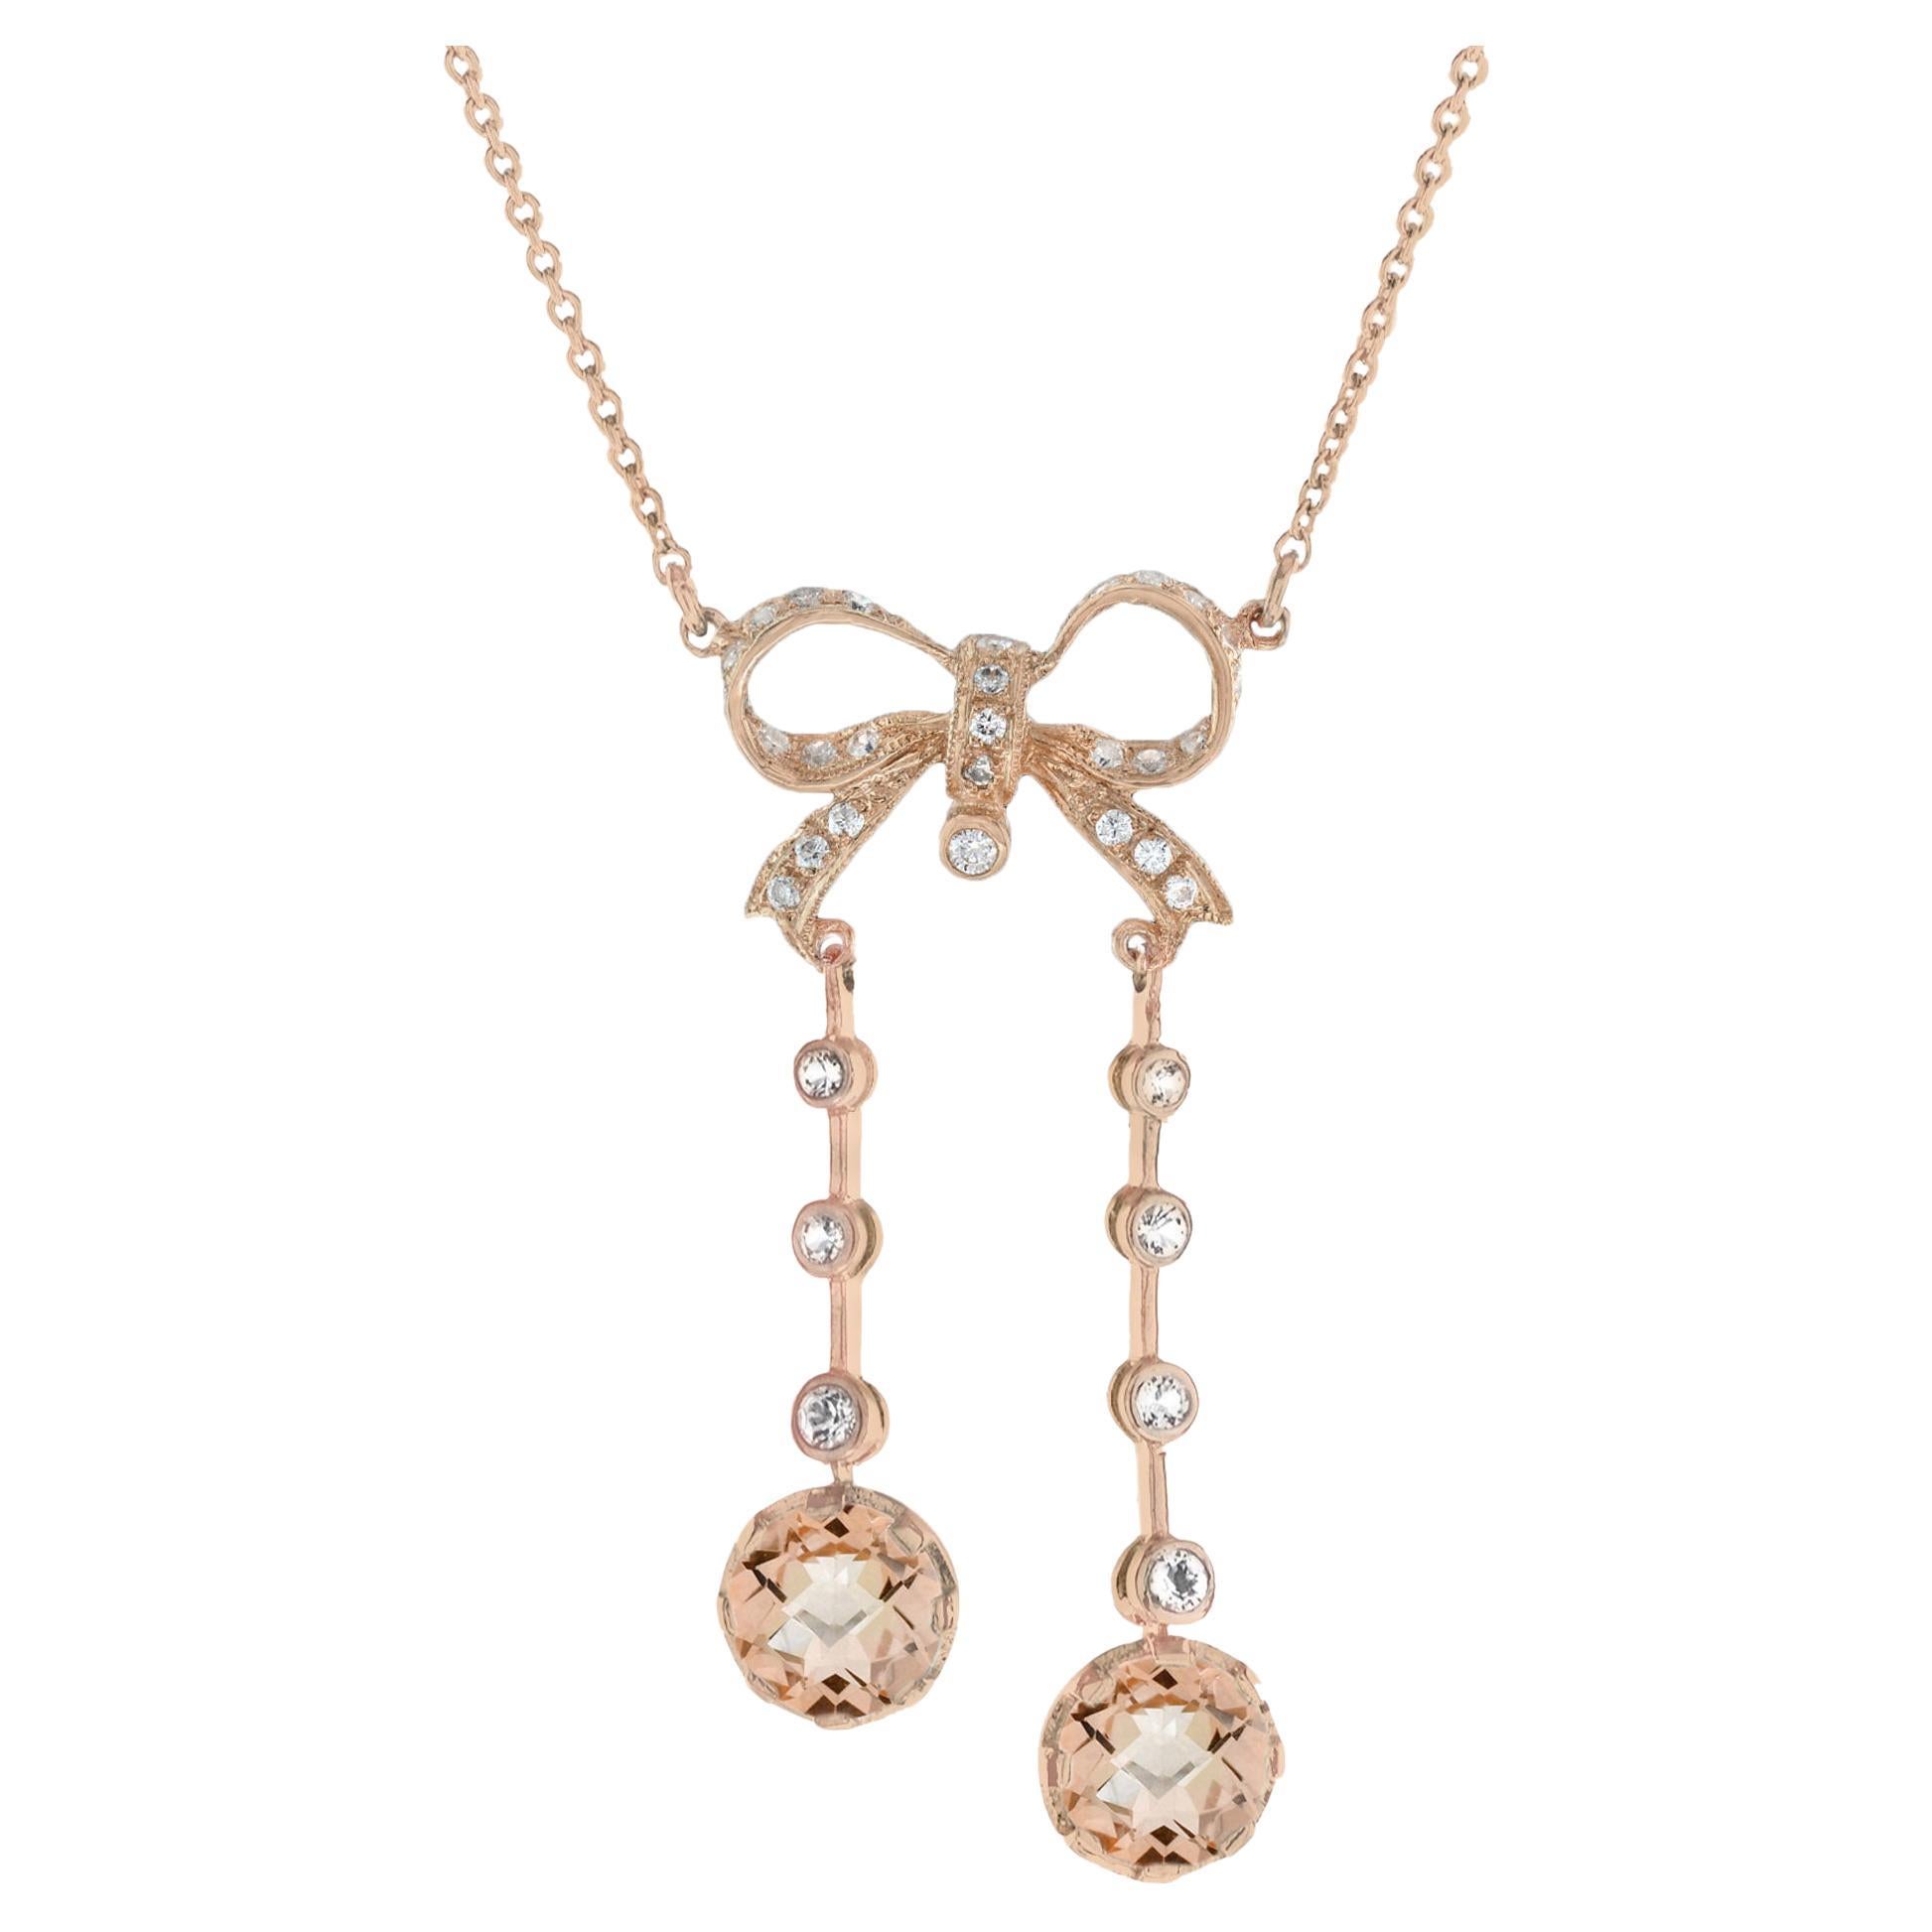 Twin Morganite and Diamond Edwardian Style Bow Necklace in 14K Rose Gold